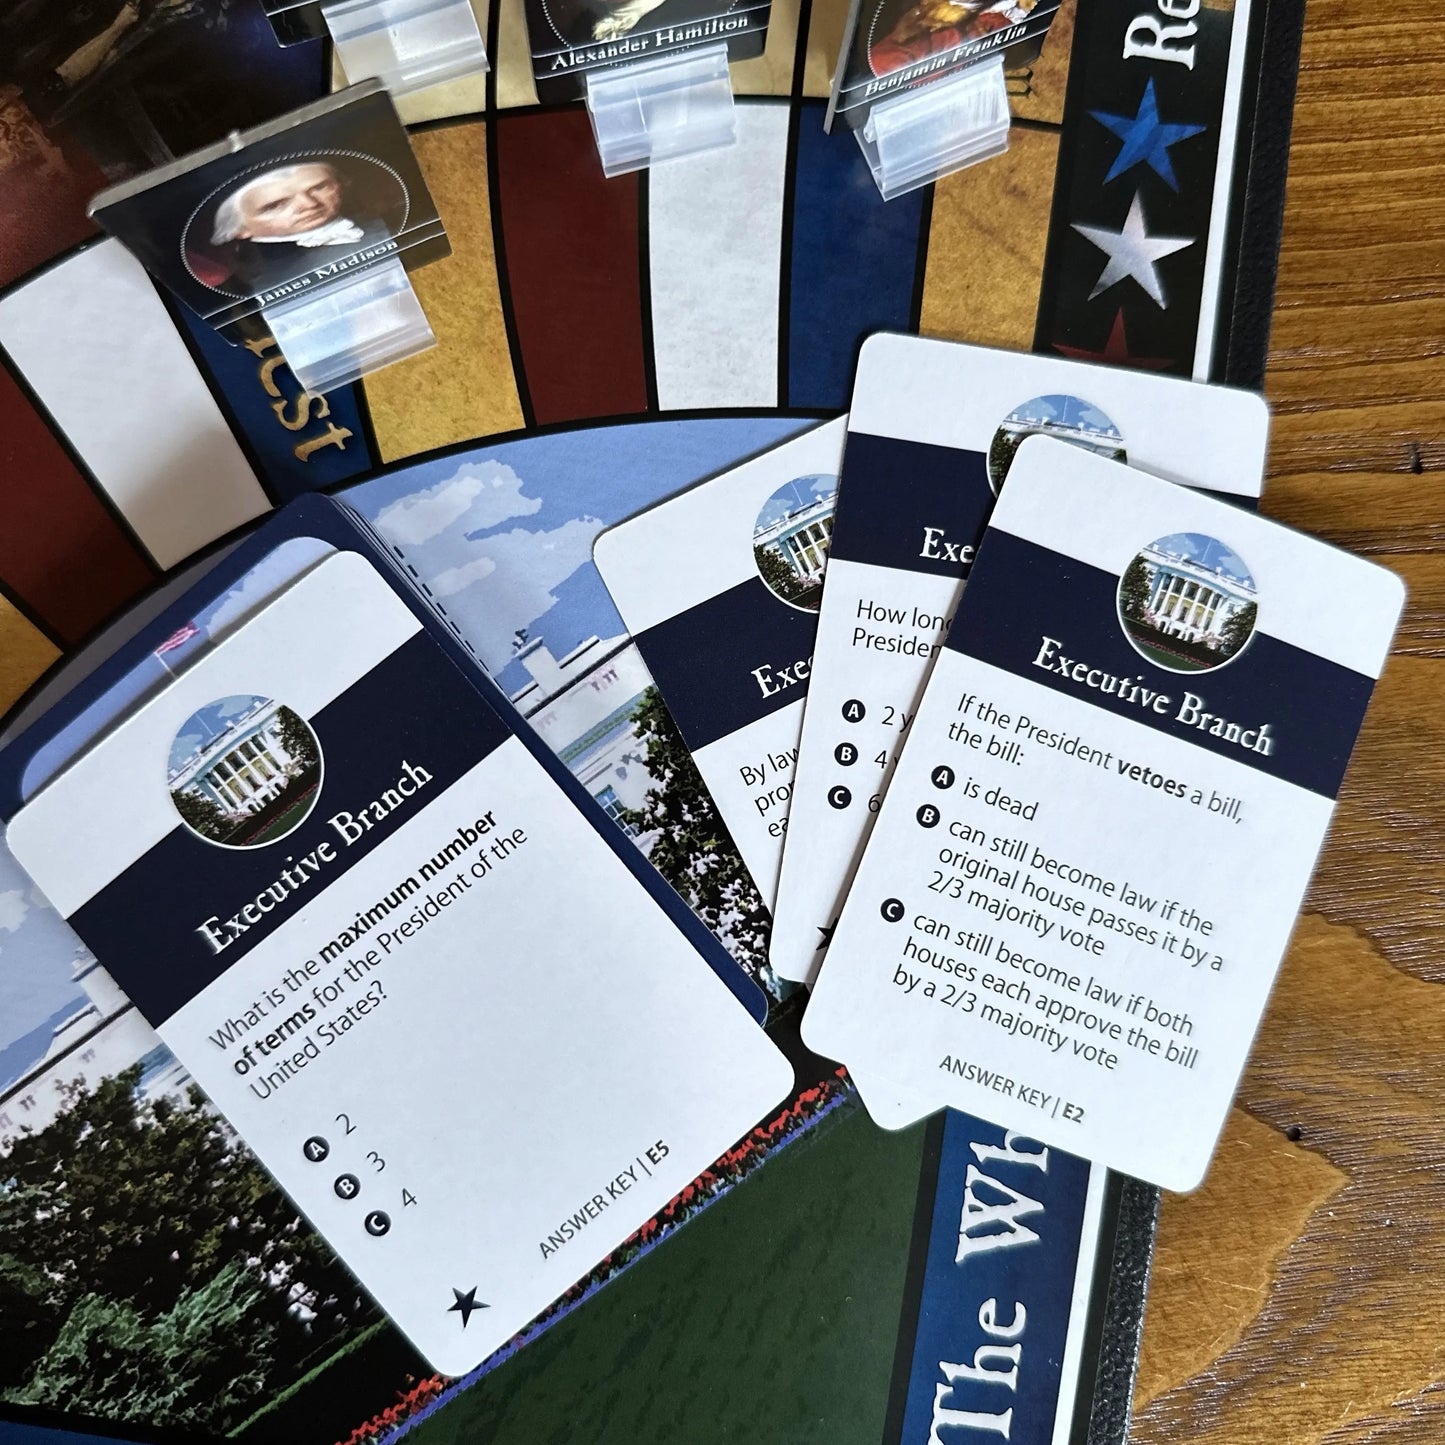 The Constitution Quest Game